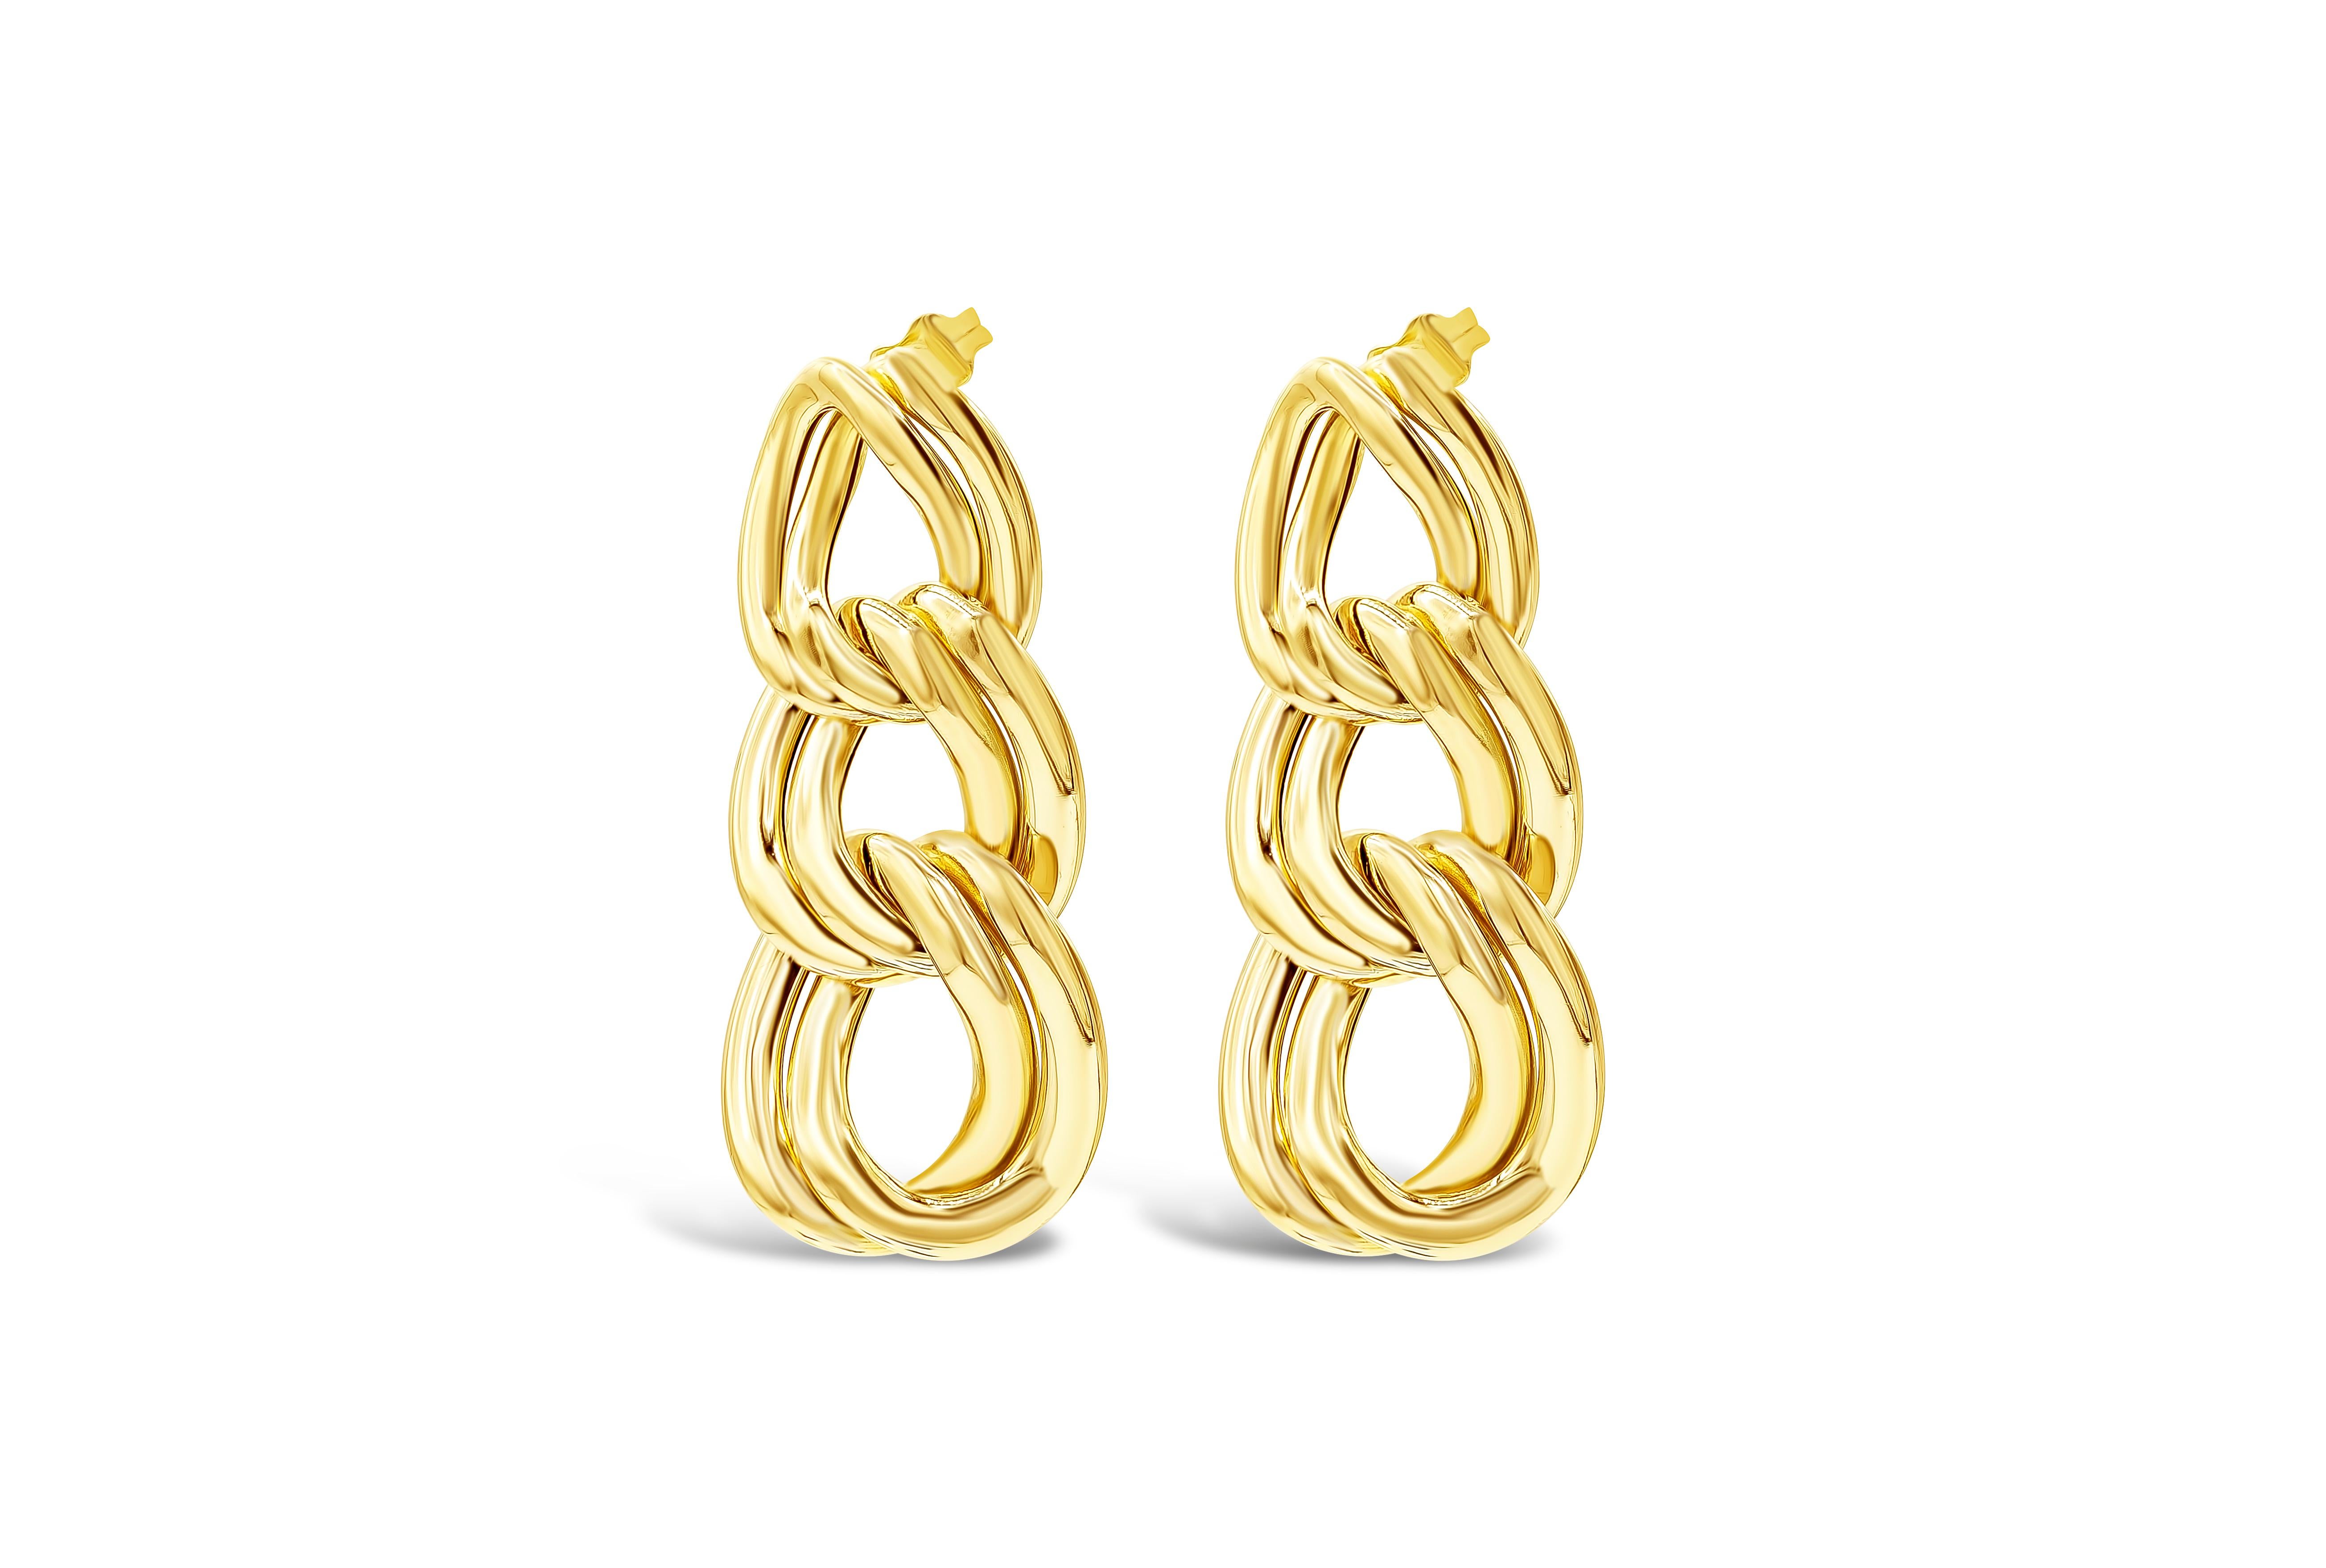 Each earring showcases three 14k yellow gold curved chains intertwined each other and 9.06 grams in total. Earrings with post. A beautiful pair of earrings. 1.65 inches in length.

Roman Malakov is a custom house, specializing in creating anything